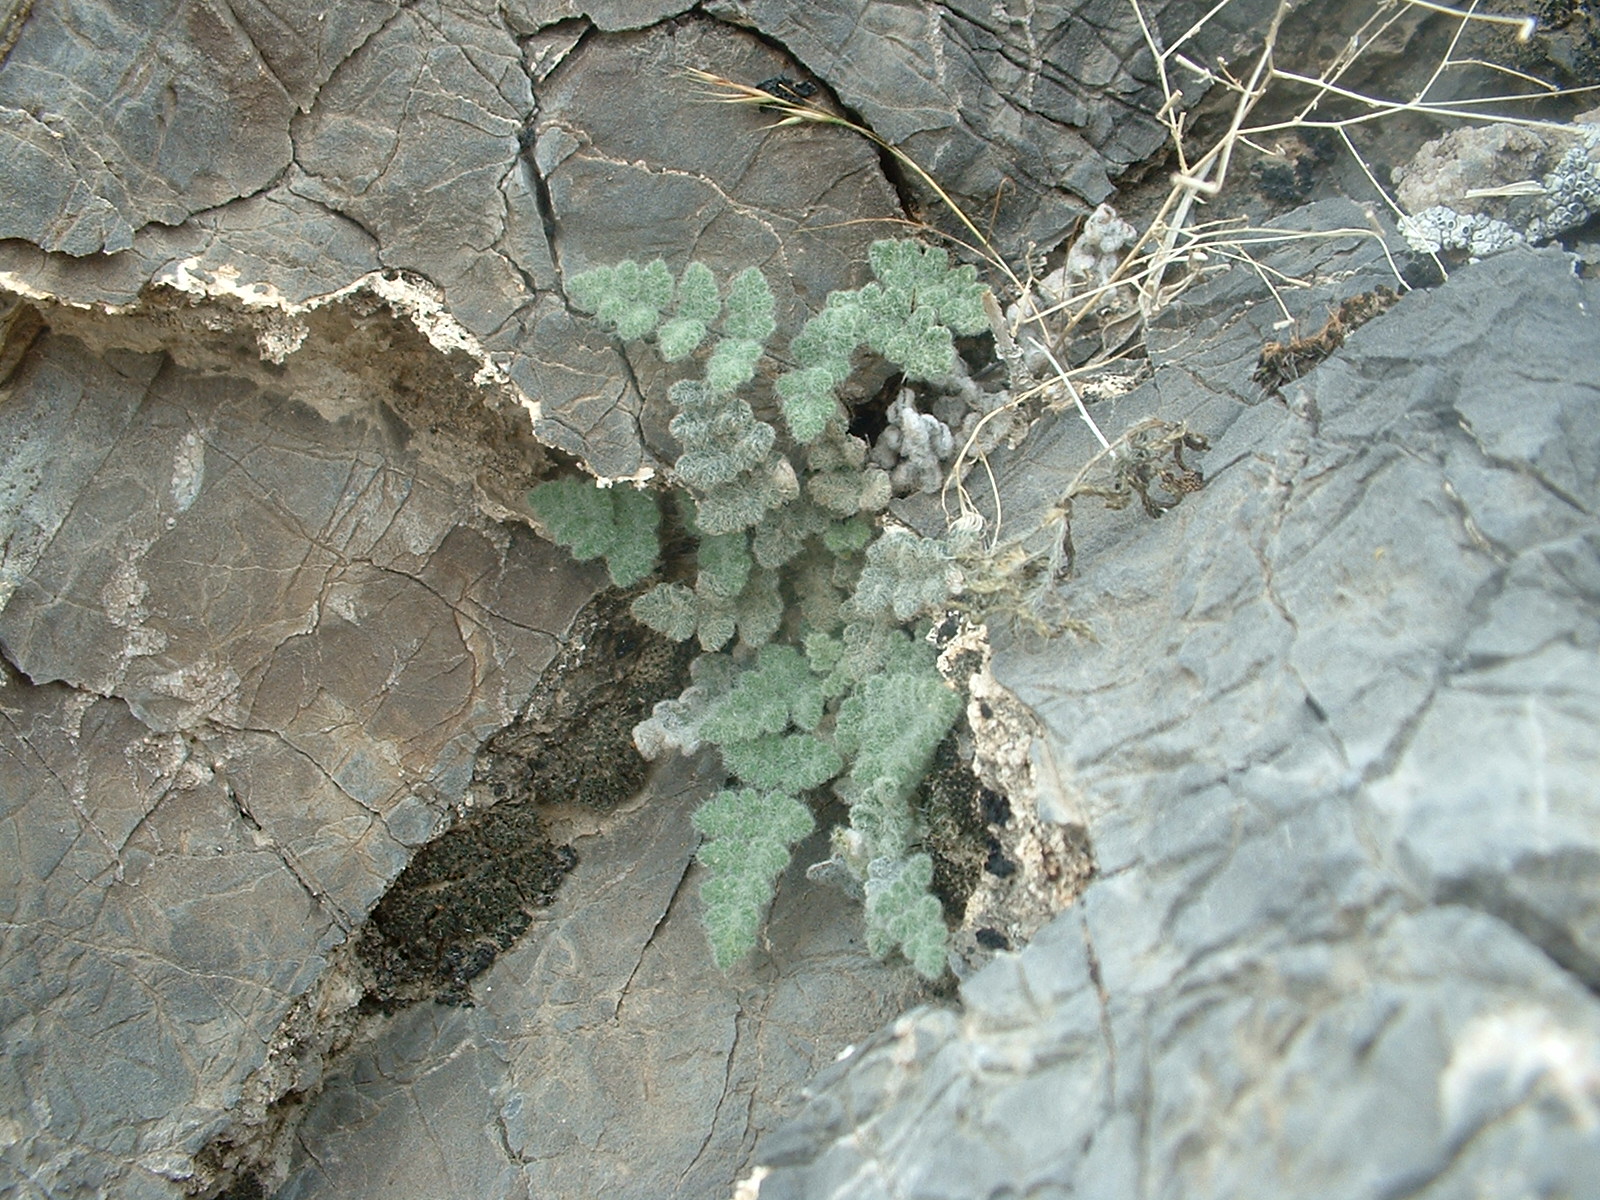 Cheilanthes paryii